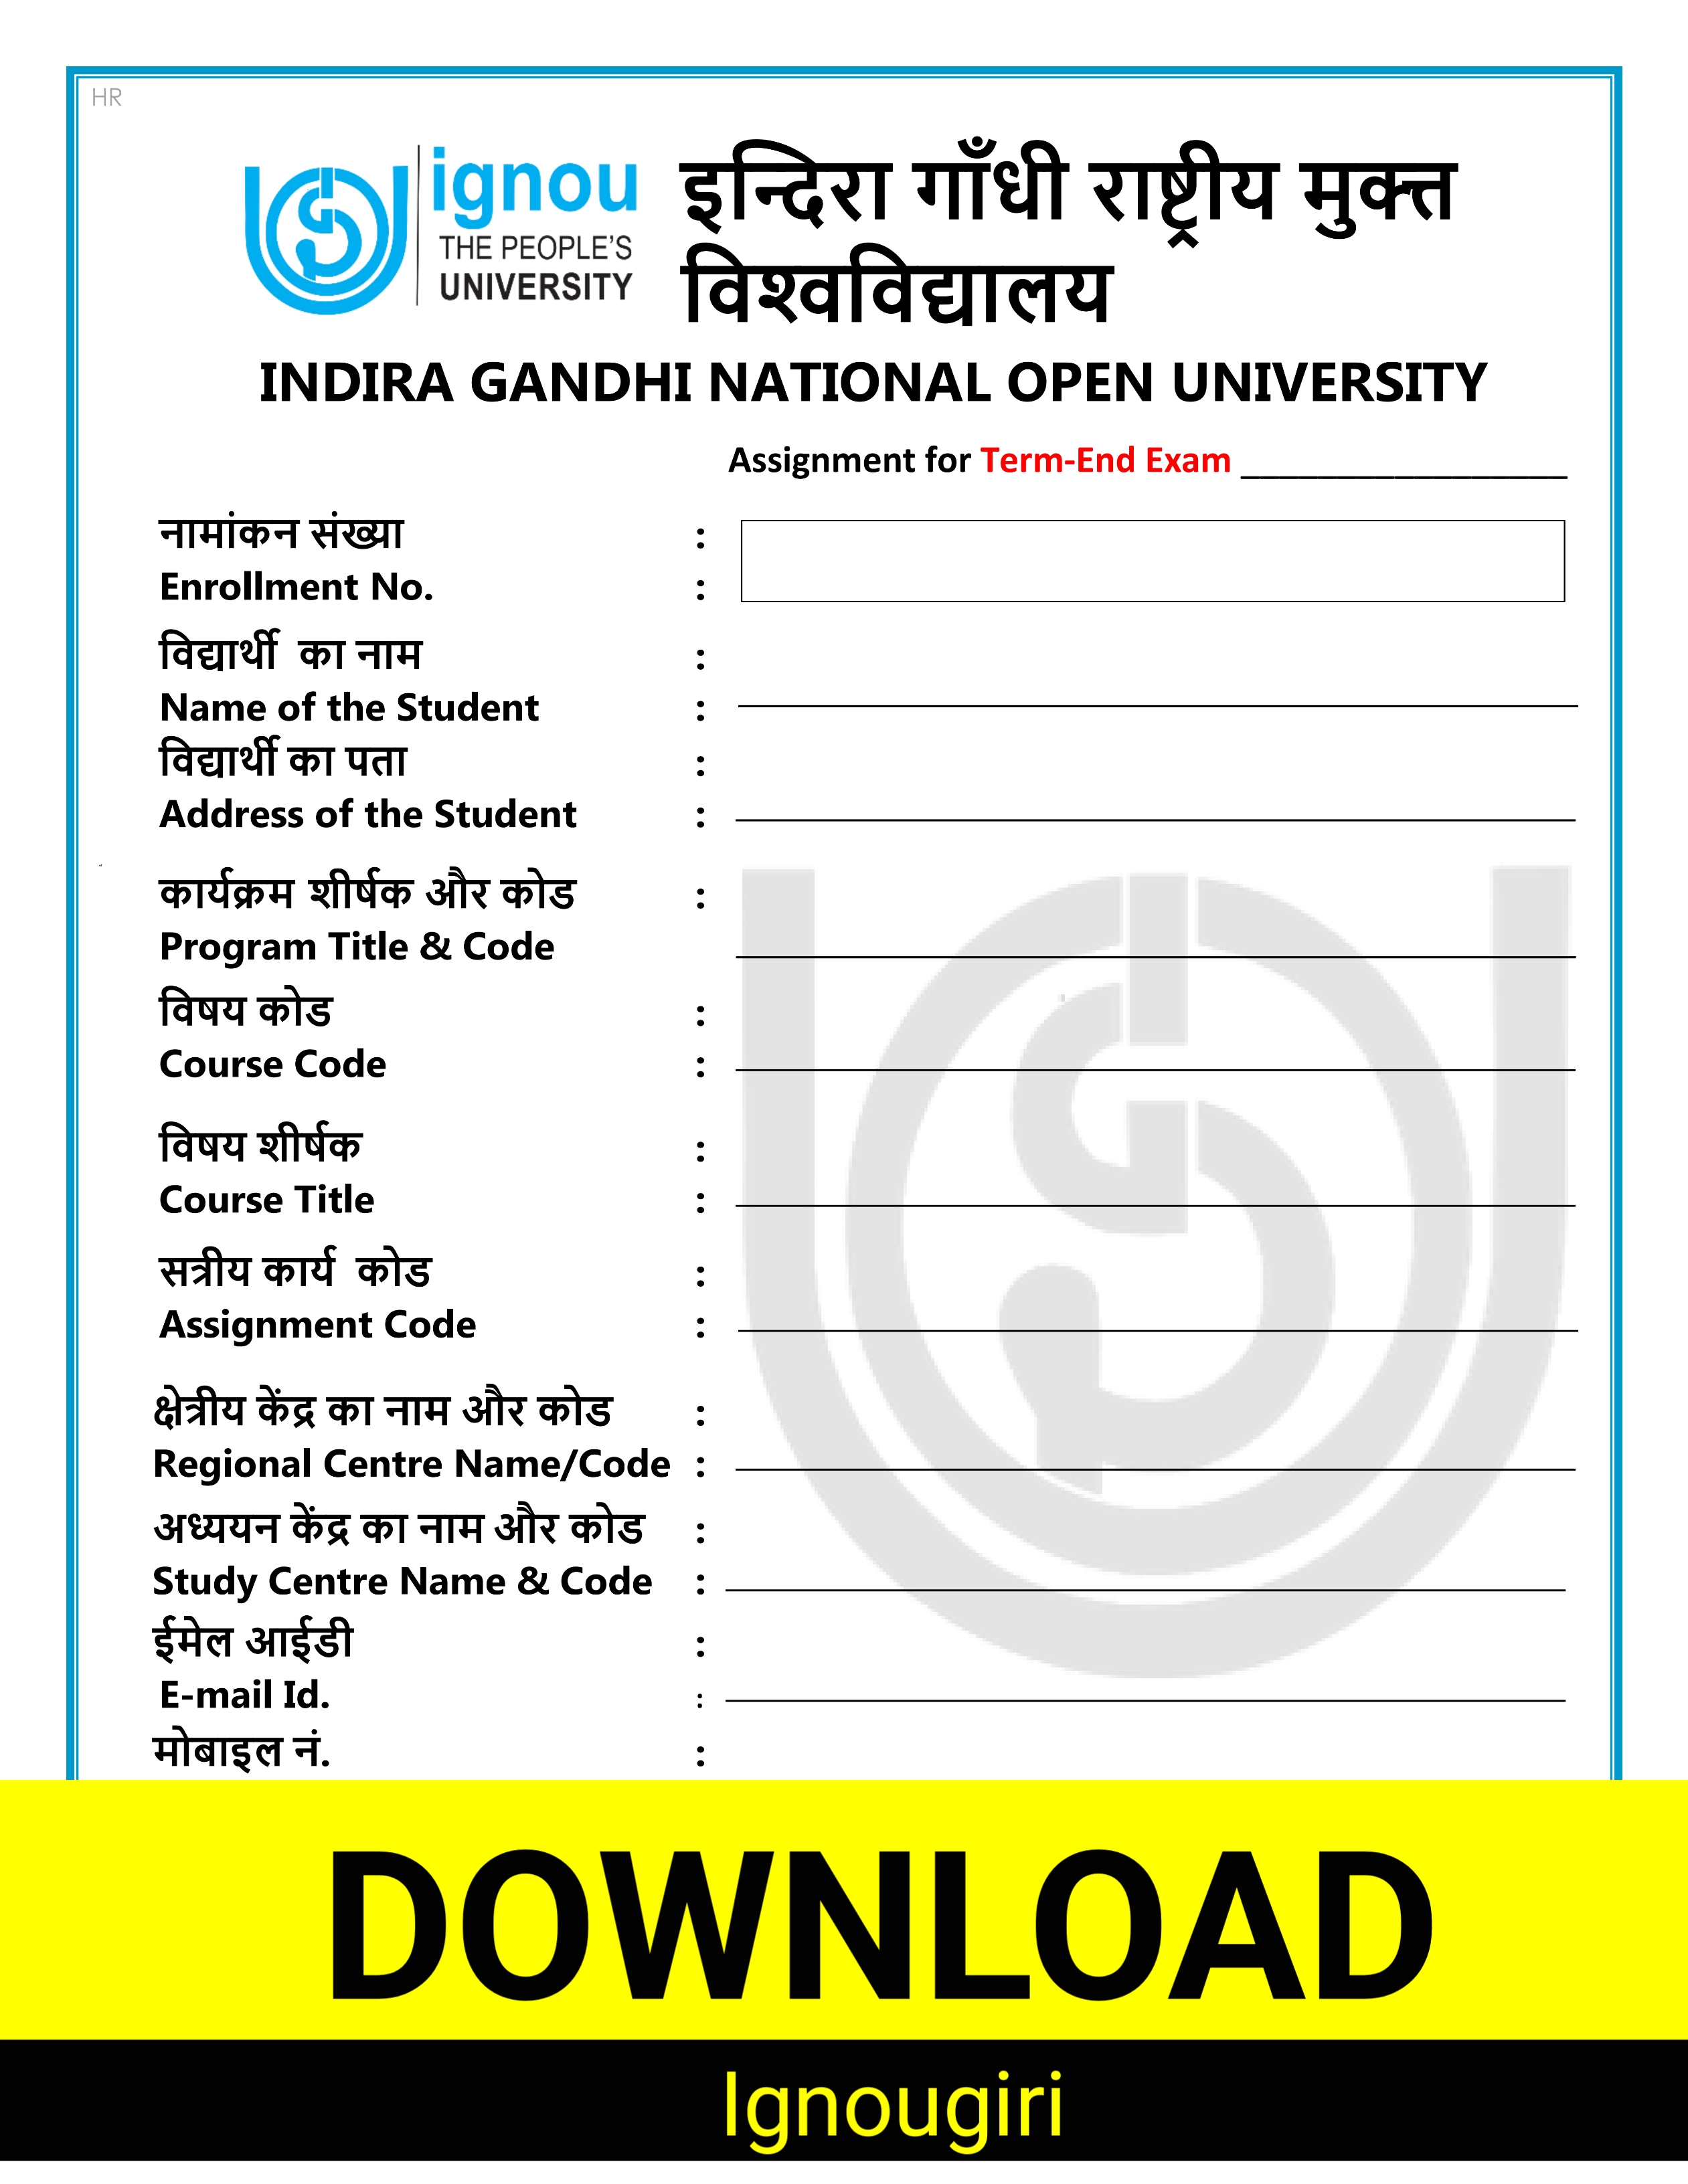 ignou assignment front page image